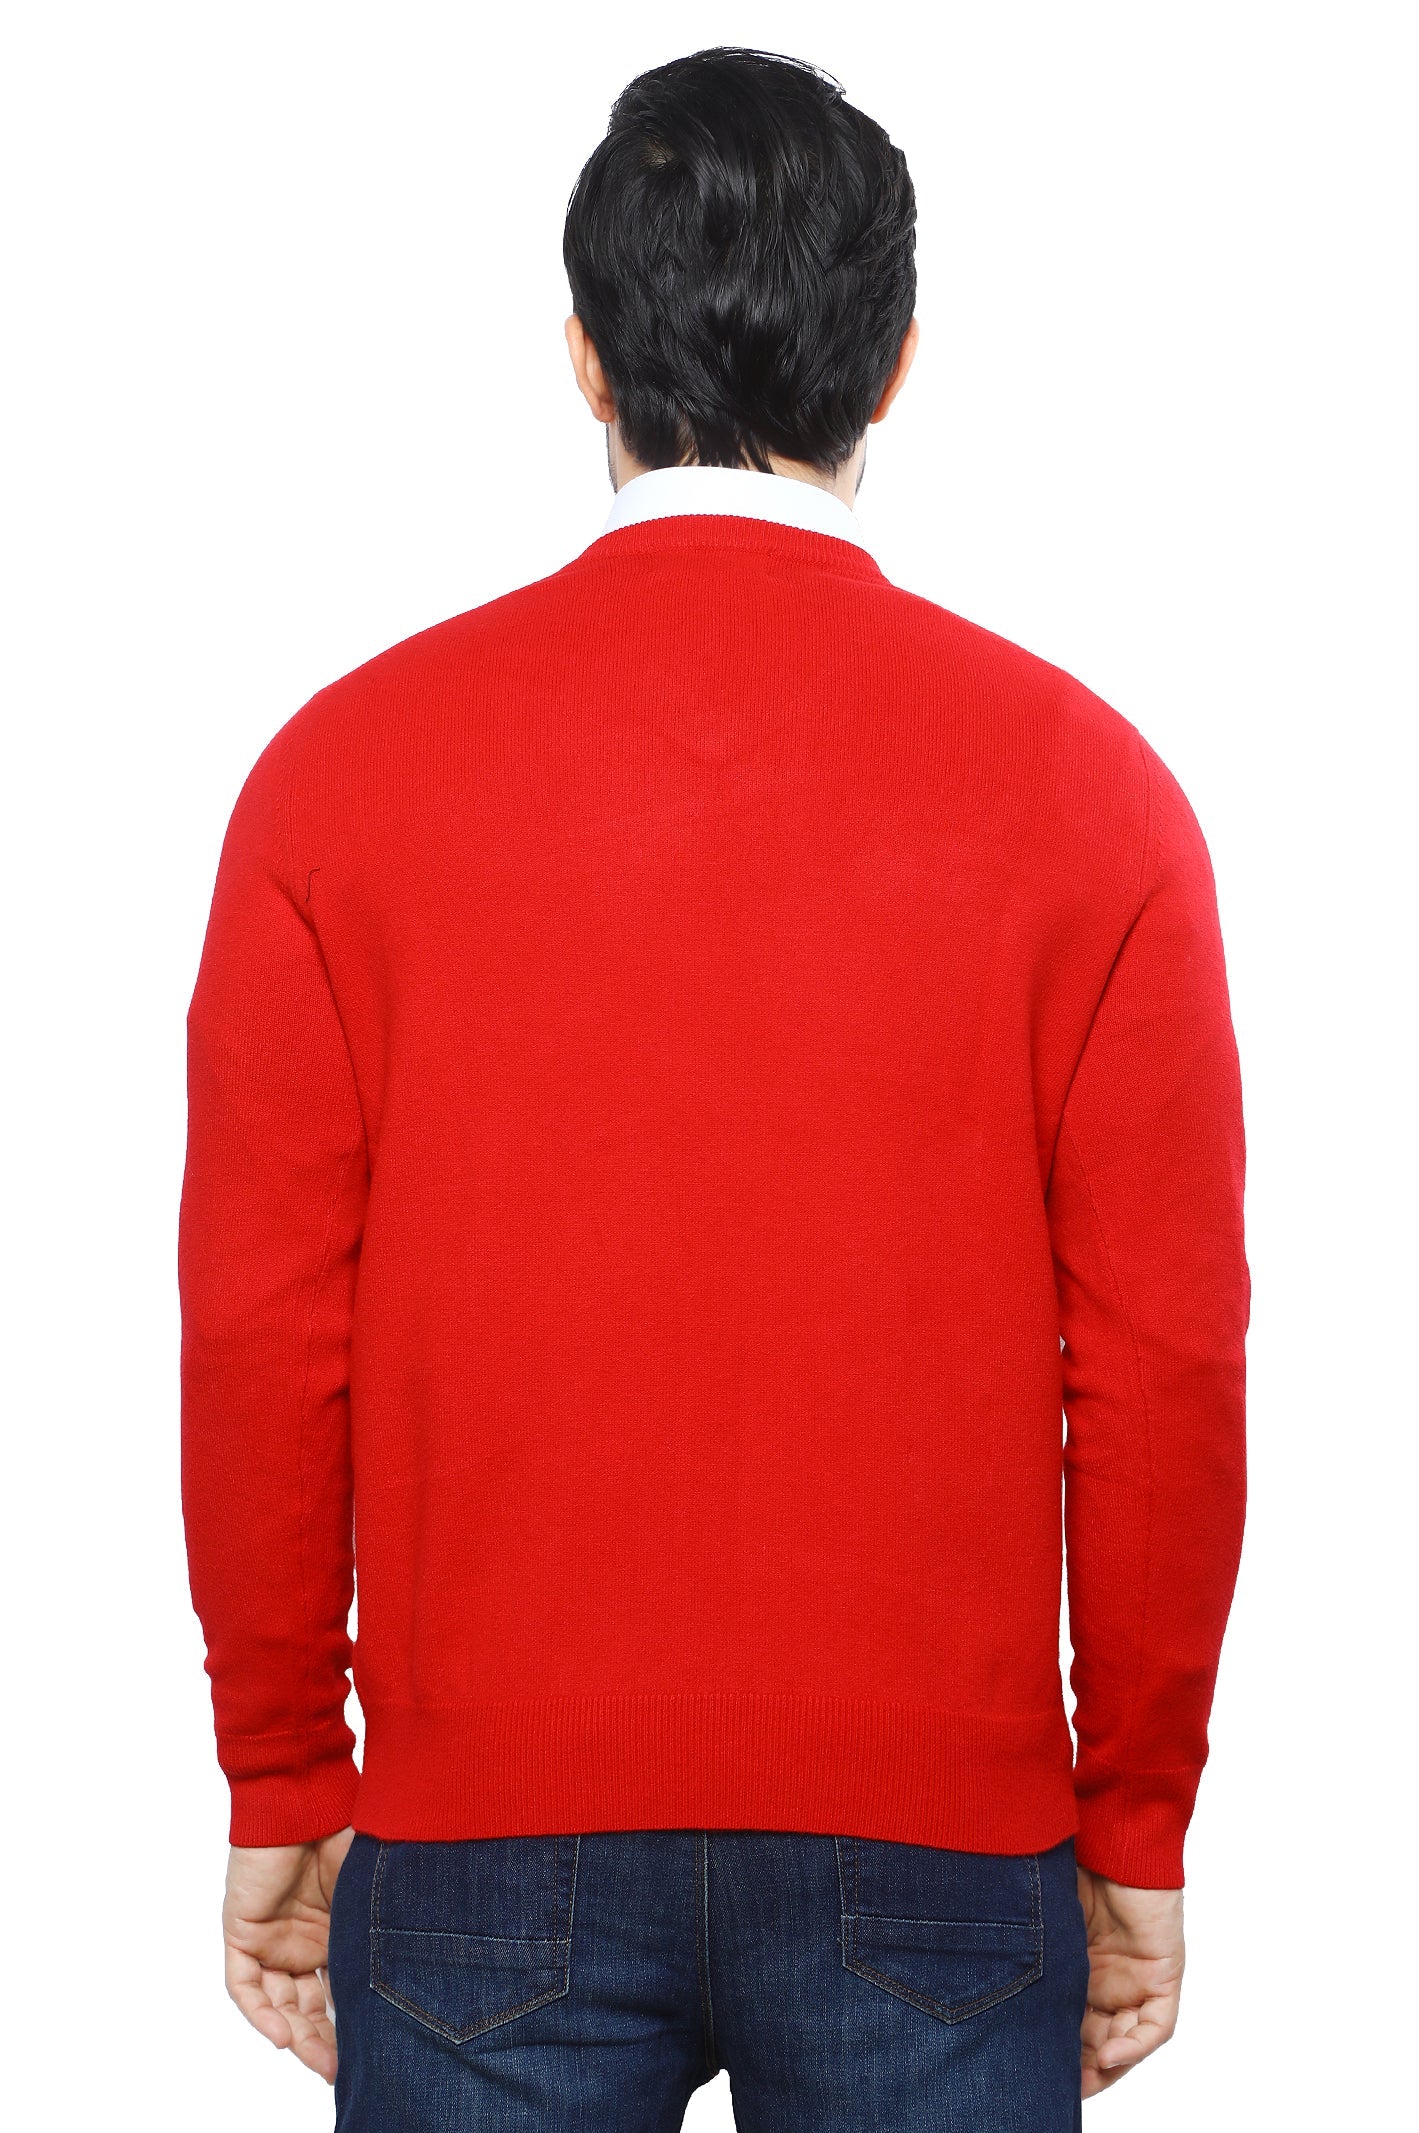 Gents Sweater SKU: SA608-RED - Diners